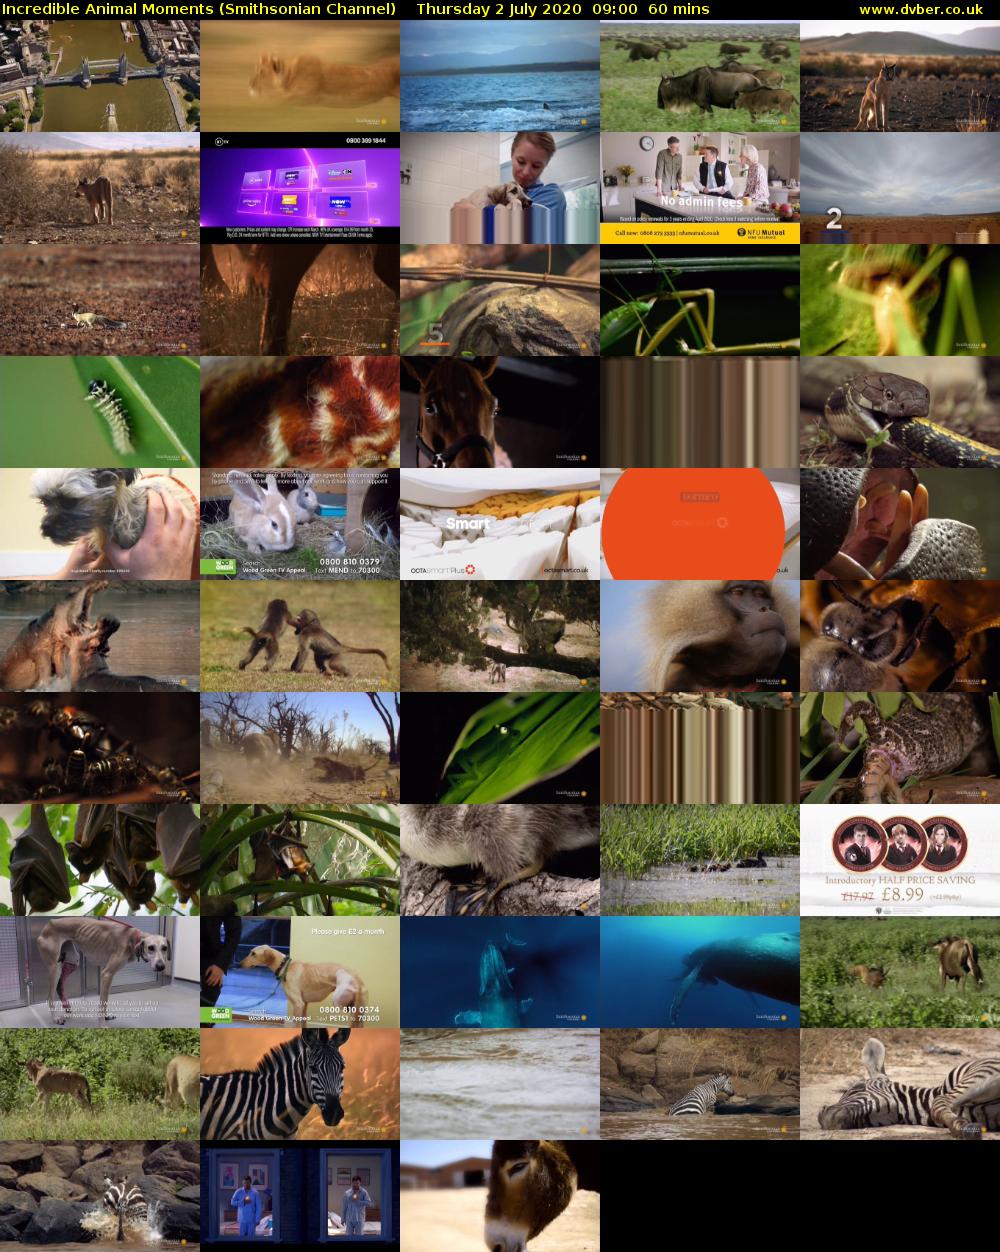 Incredible Animal Moments (Smithsonian Channel) Thursday 2 July 2020 09:00 - 10:00